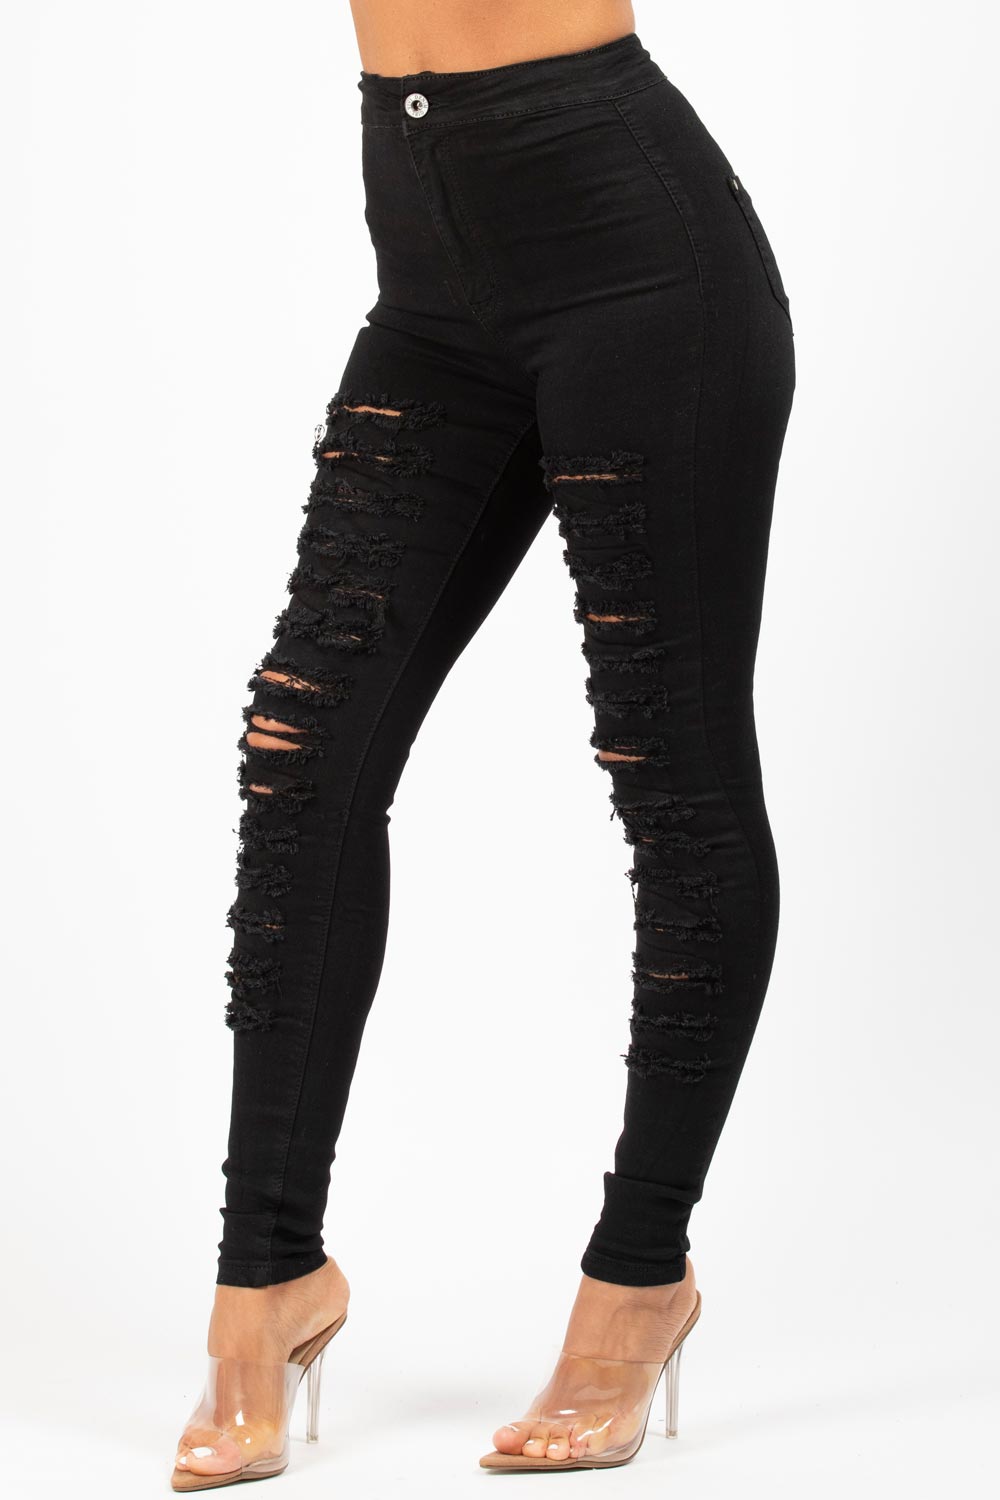 Womens Black  Ripped  Skinny Jeans  High Waisted Styledup co uk